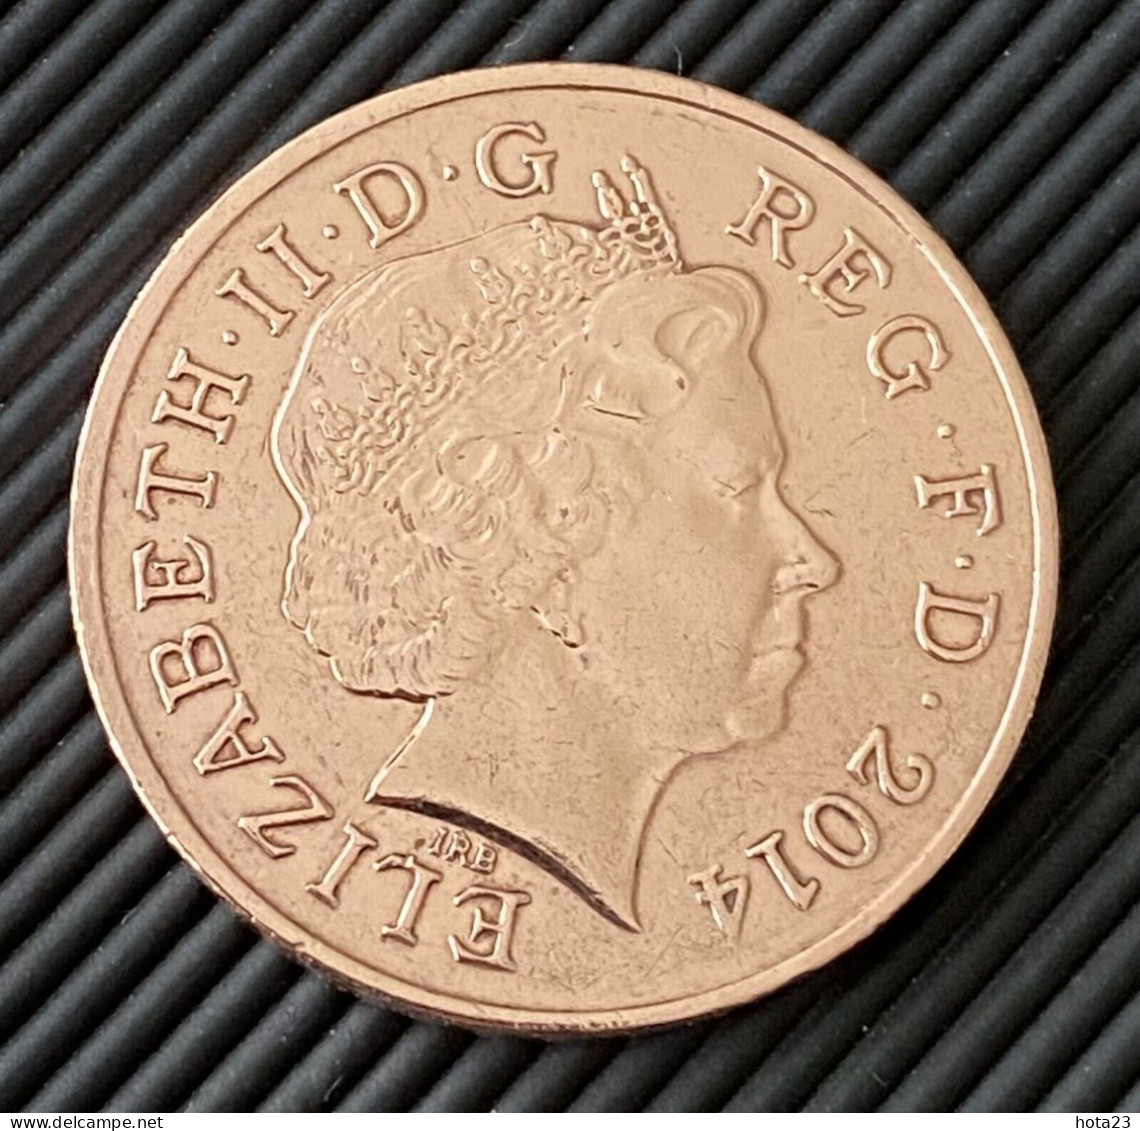 2014 British Copper-Plated Steel ELIZABETH II TWO PENCE 2p Coin - 2 Pence & 2 New Pence